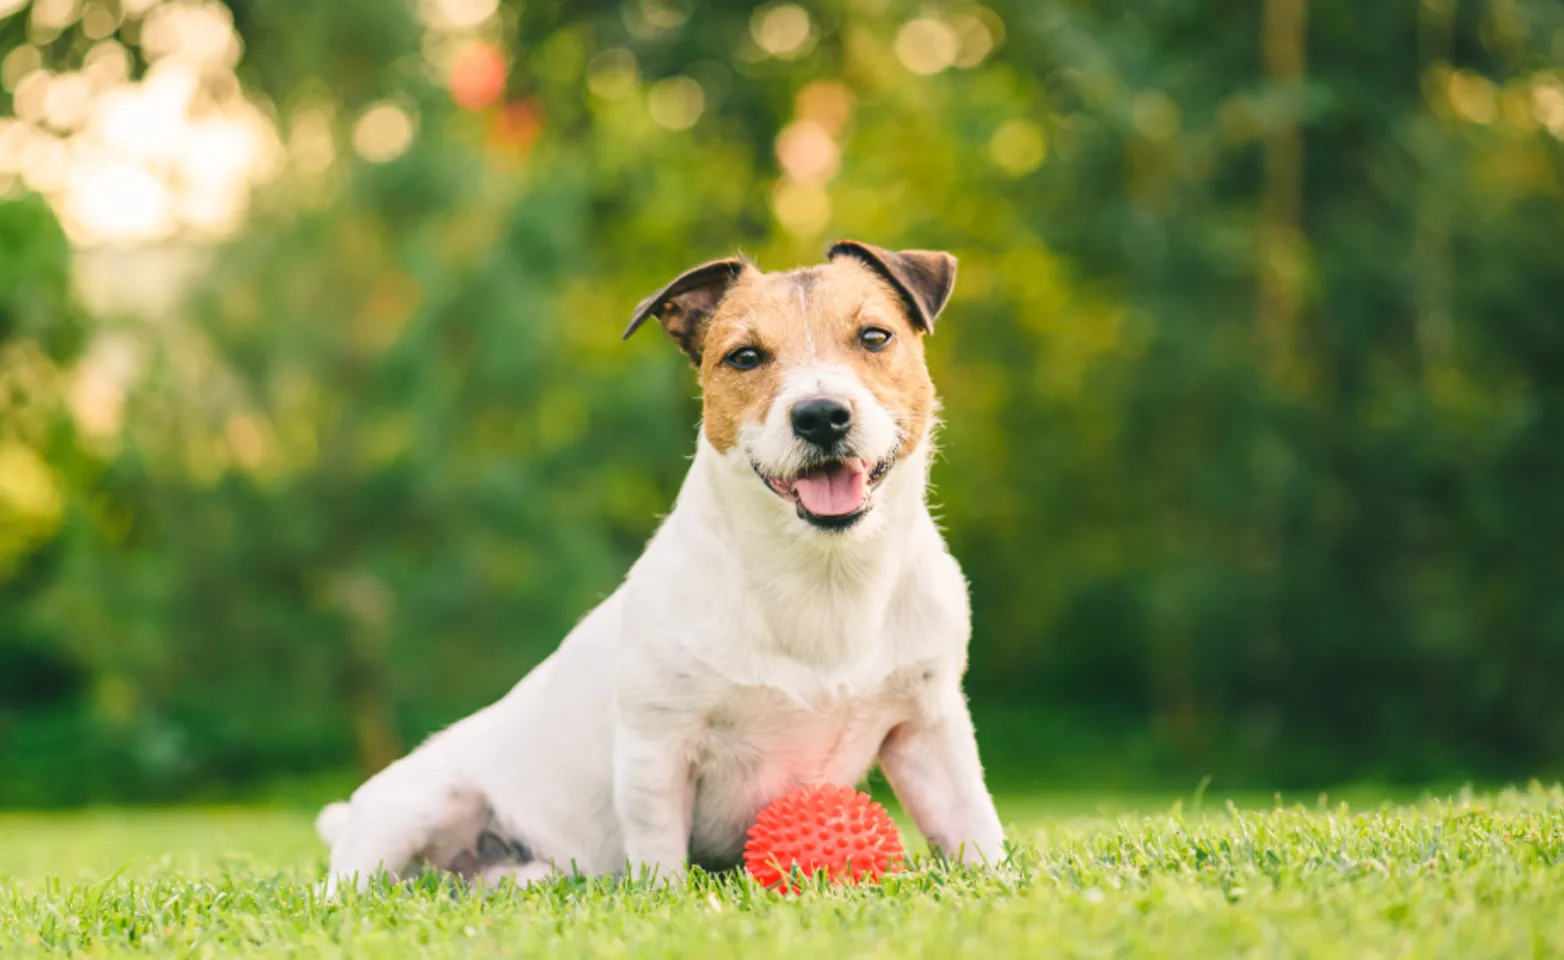 Jack Russell Terrier sitting on green lawn with orange ball